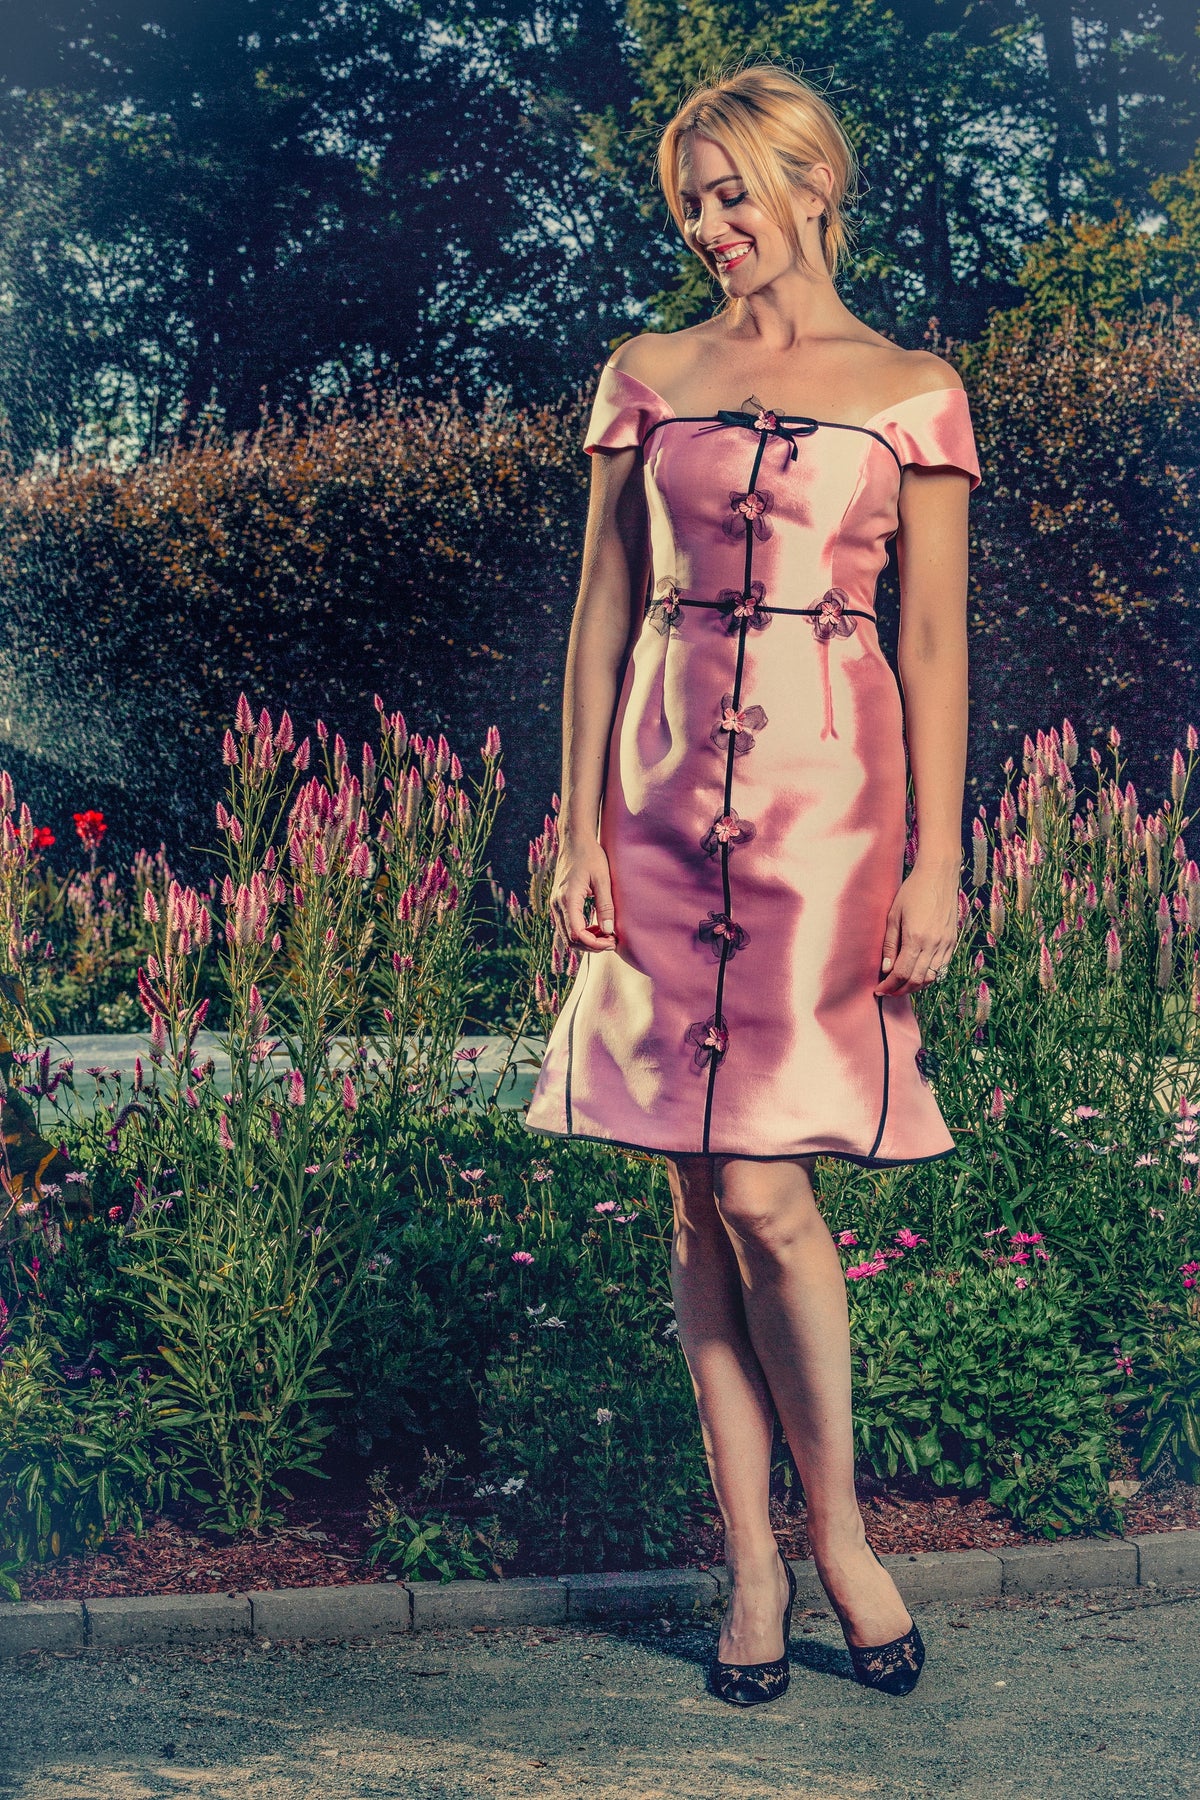 anna nieman designer dress Boston. Fantasia was inspired by my cherry tree blooming so beautifully every May in my garden. The black trim defines the beautiful feminine form.